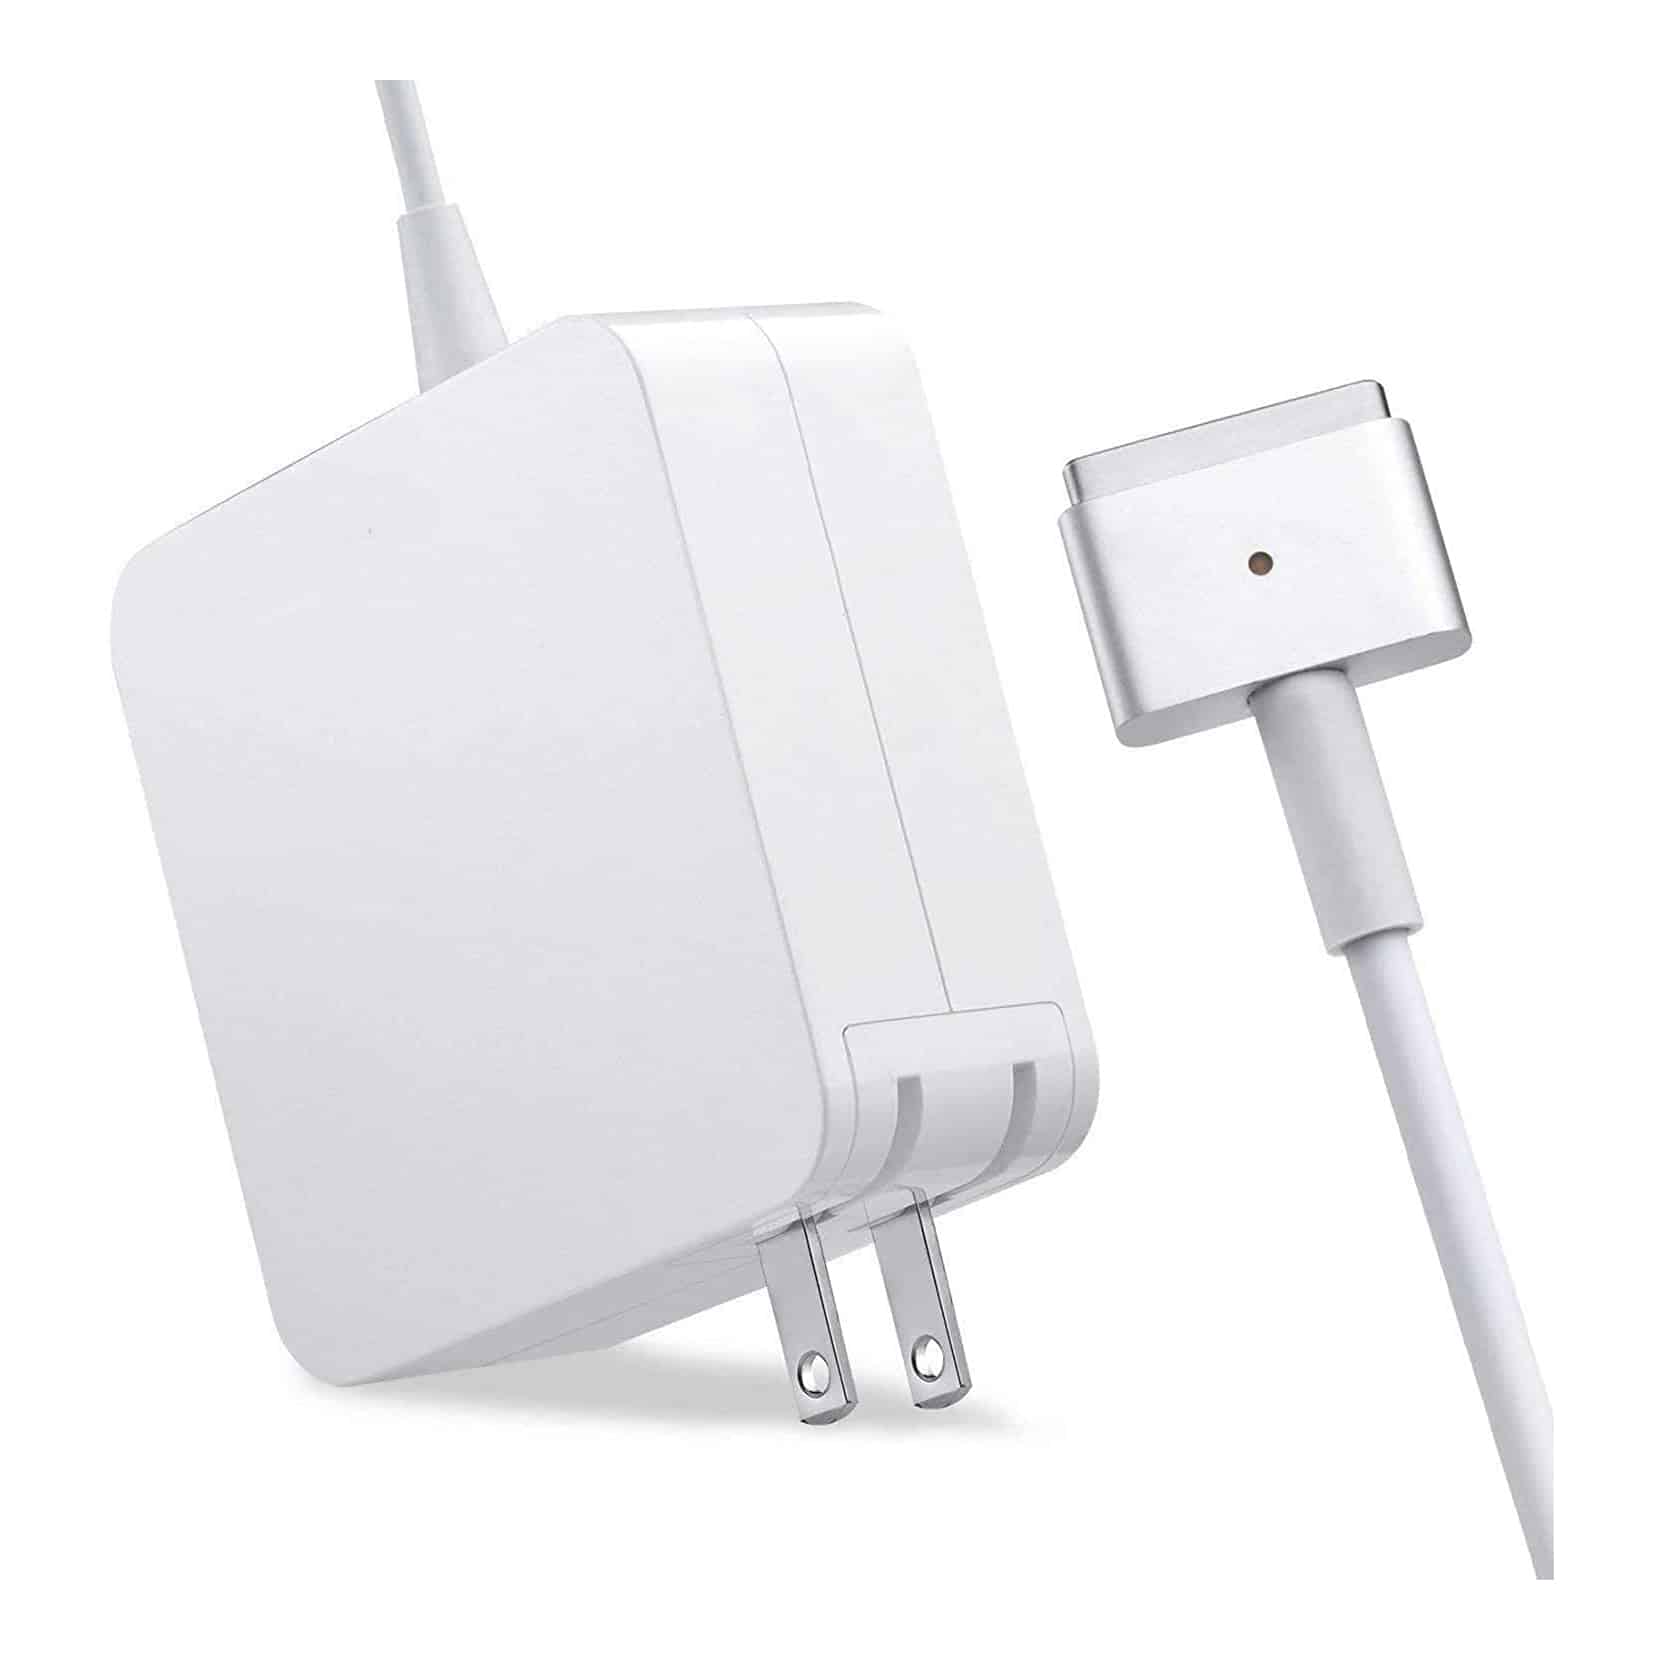 apple a1181 macbook charger